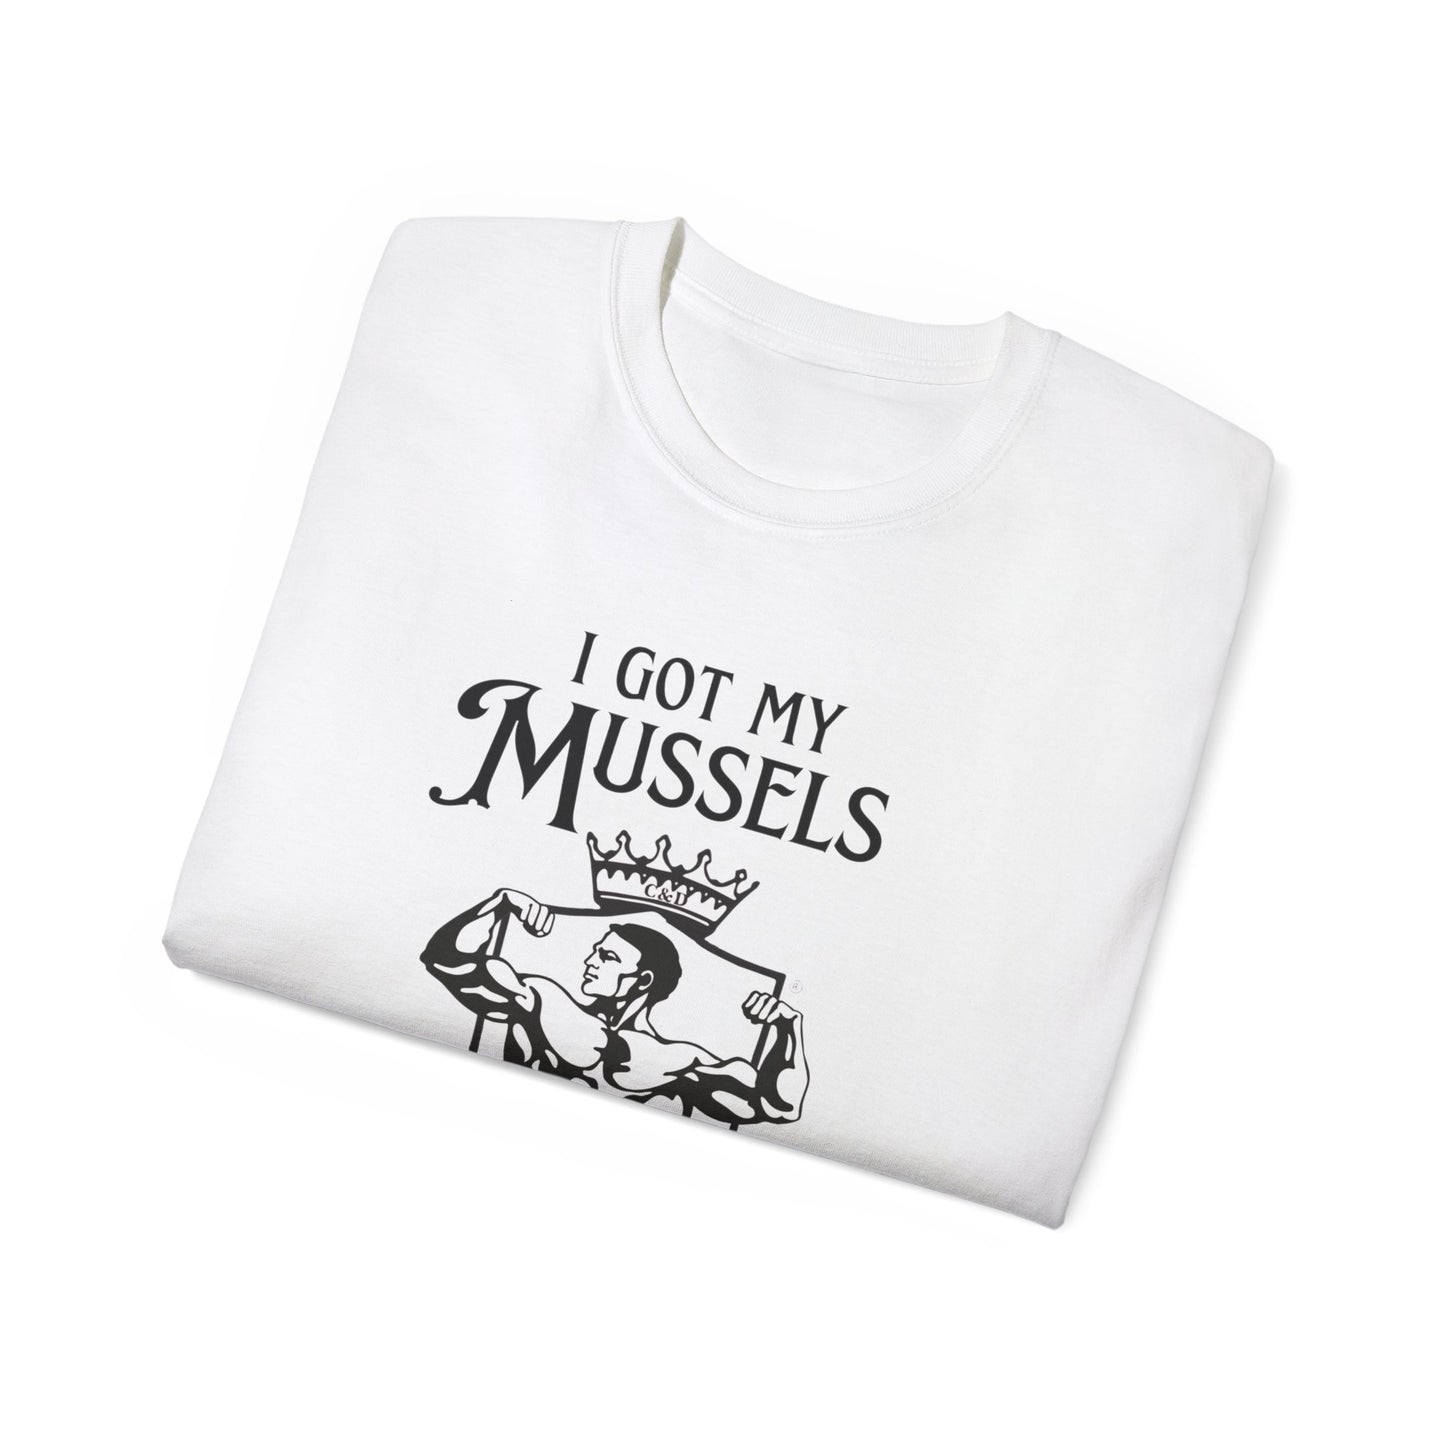 "I Got my Mussels at Lenny's" Ultra Cotton Tee